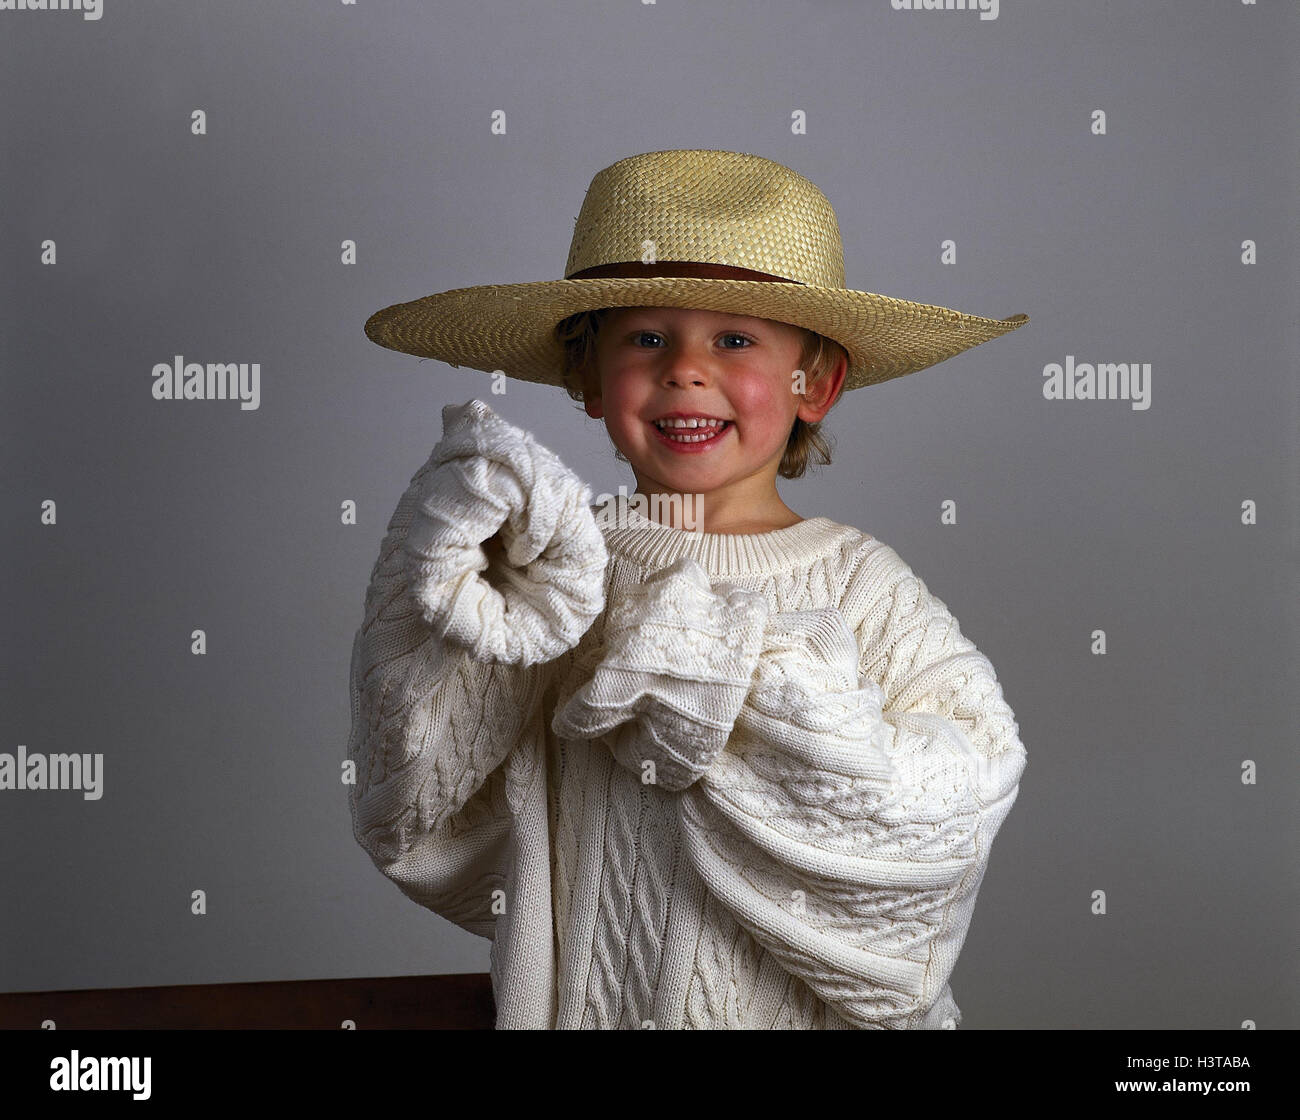 Girls, straw hat, wool pullover, outsize, smile, half portrait, studio child, clothes, oversized, adult's clothes, pullover, knitted pullover, care, game, fun, childhood, carefree nature, Stock Photo